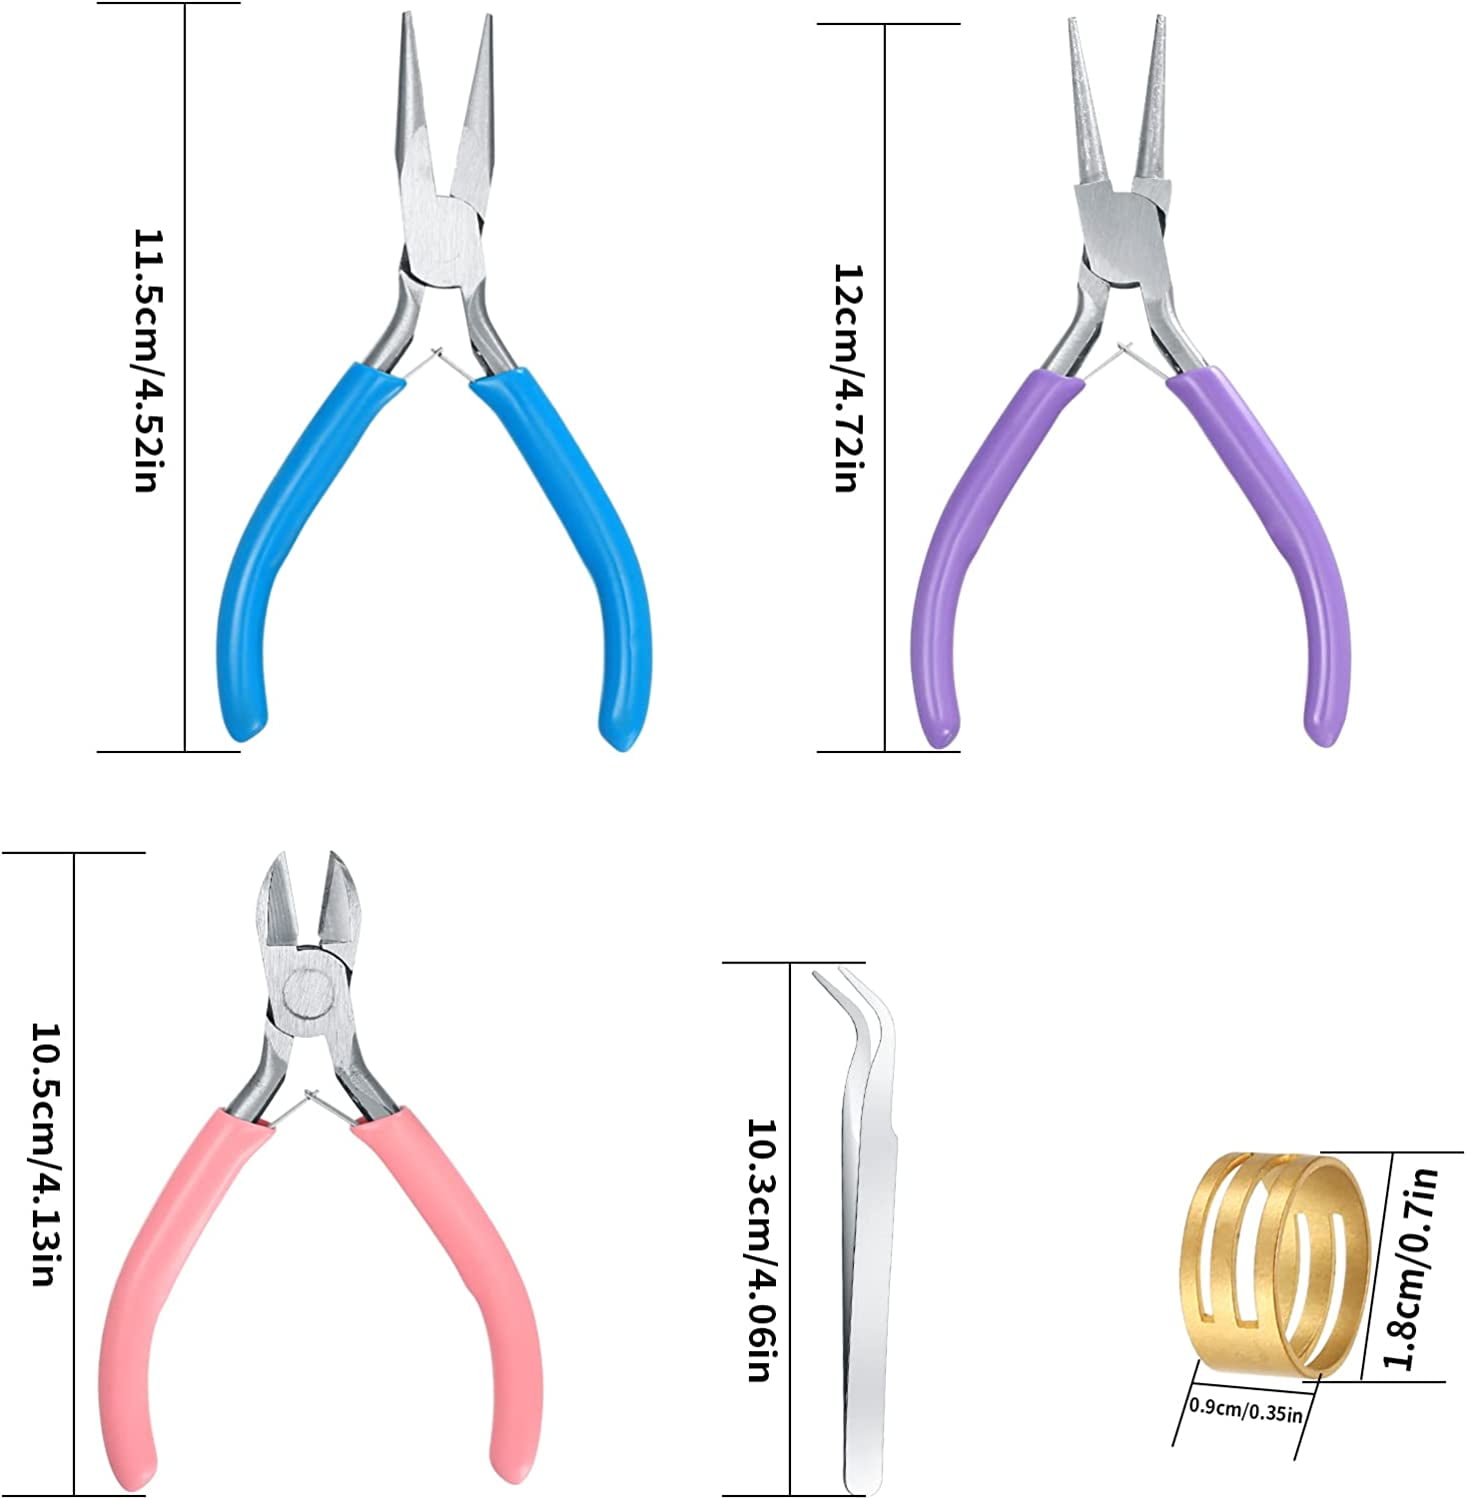  3 Pcs Jewelry Pliers for Jewelry Making, Multipurpose Jewelry  Making Tools & Accessories, Practical Jewelry Repair Kit Tools, Pliers for  Jewelry Making : Arts, Crafts & Sewing